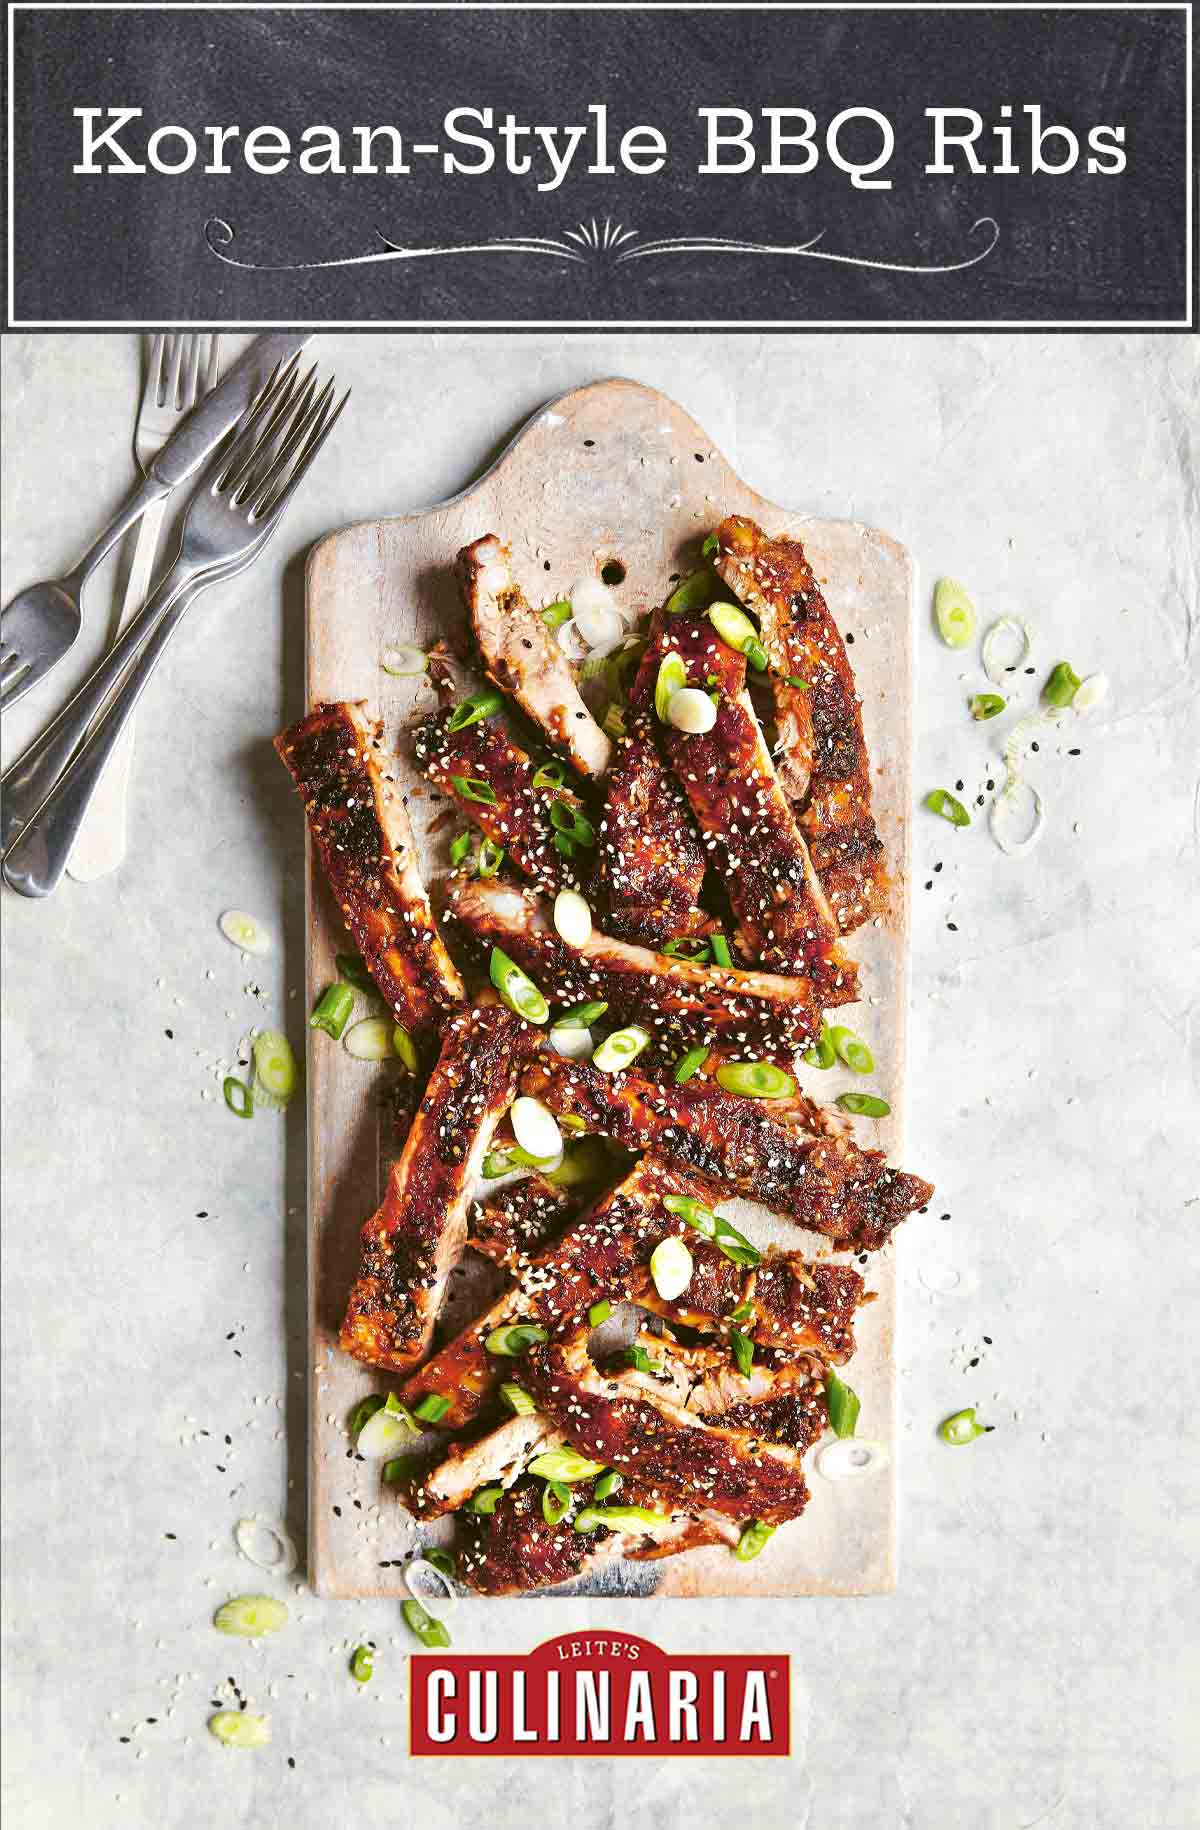 A pile of Korean-style BBQ ribs on a wooden board, garnished with scallions and sesame seeds with several forks on the side.